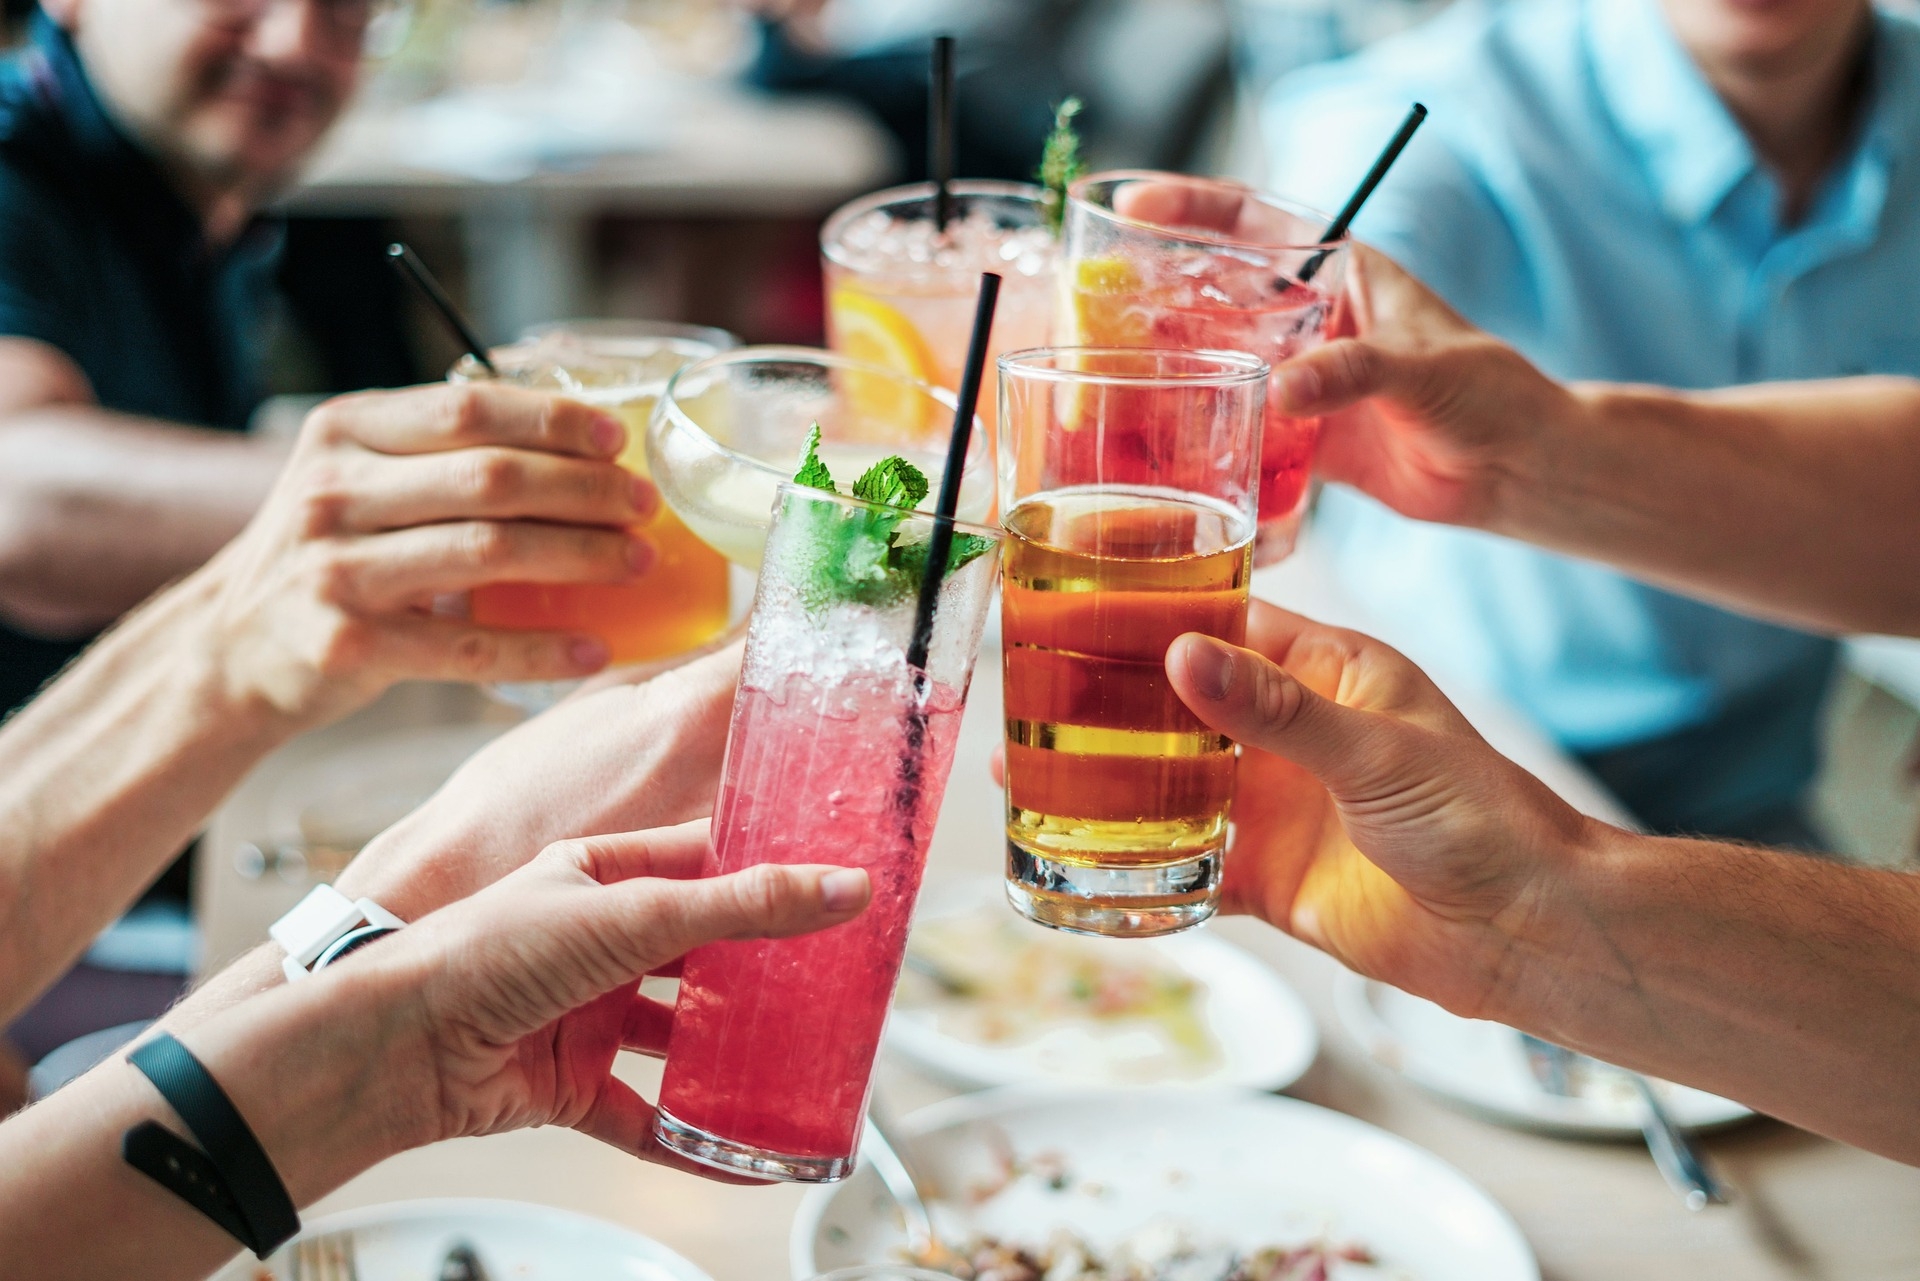 Atrial fibrillation is linked to overconsumption of alcoholic drinks